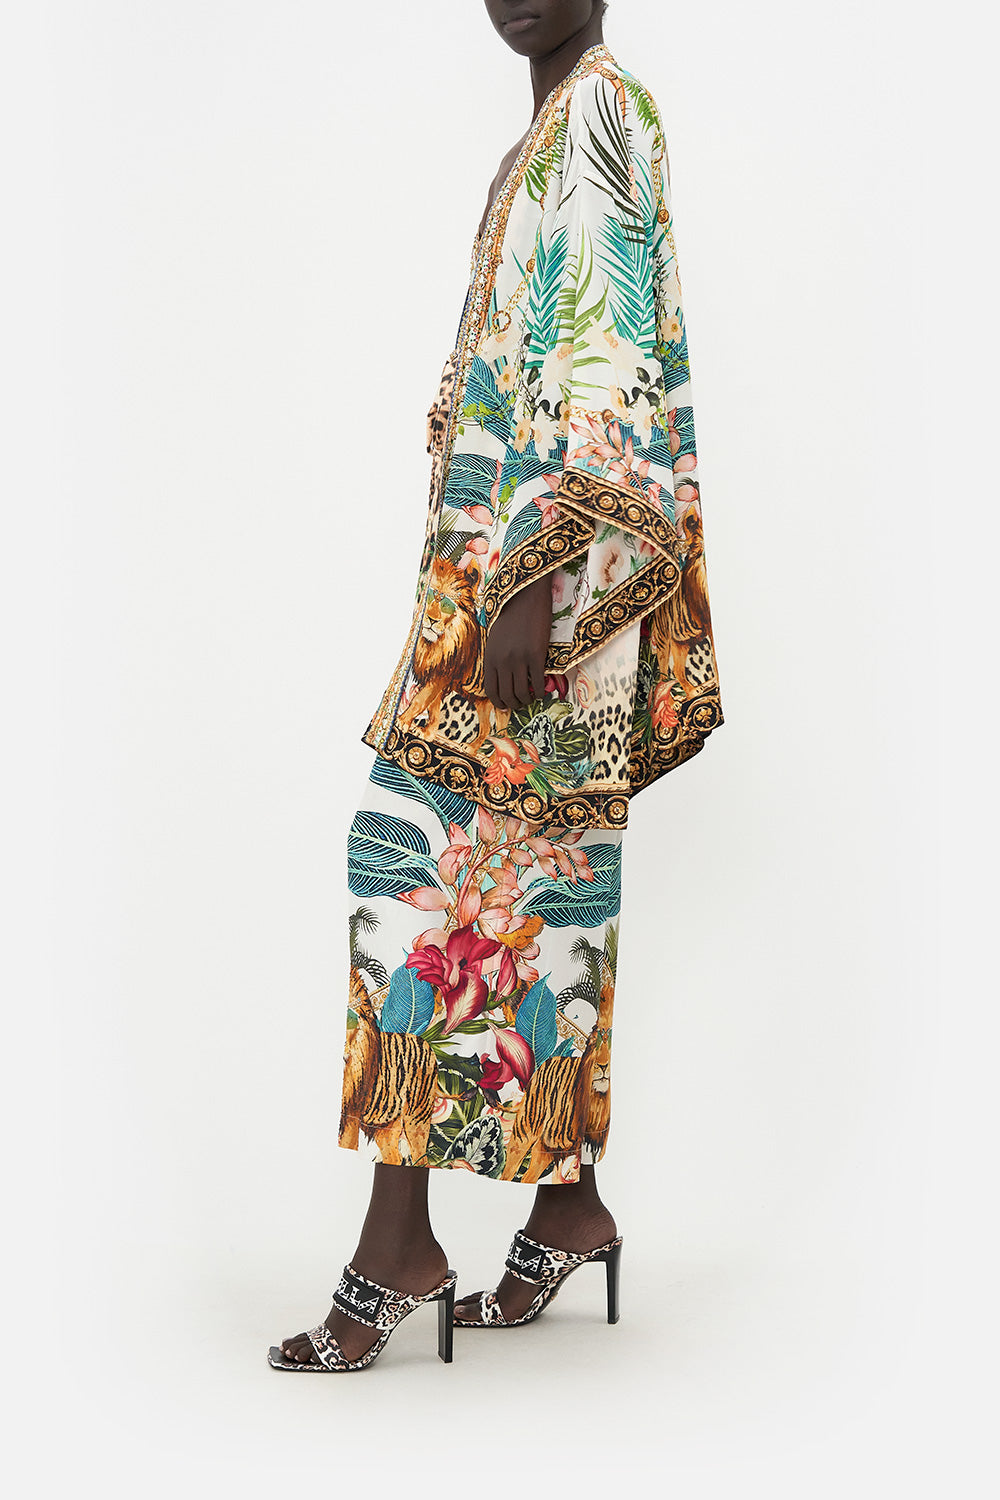 Camilla Short Layer with Neckband, Royalty Loyalty Silk Floral Robe